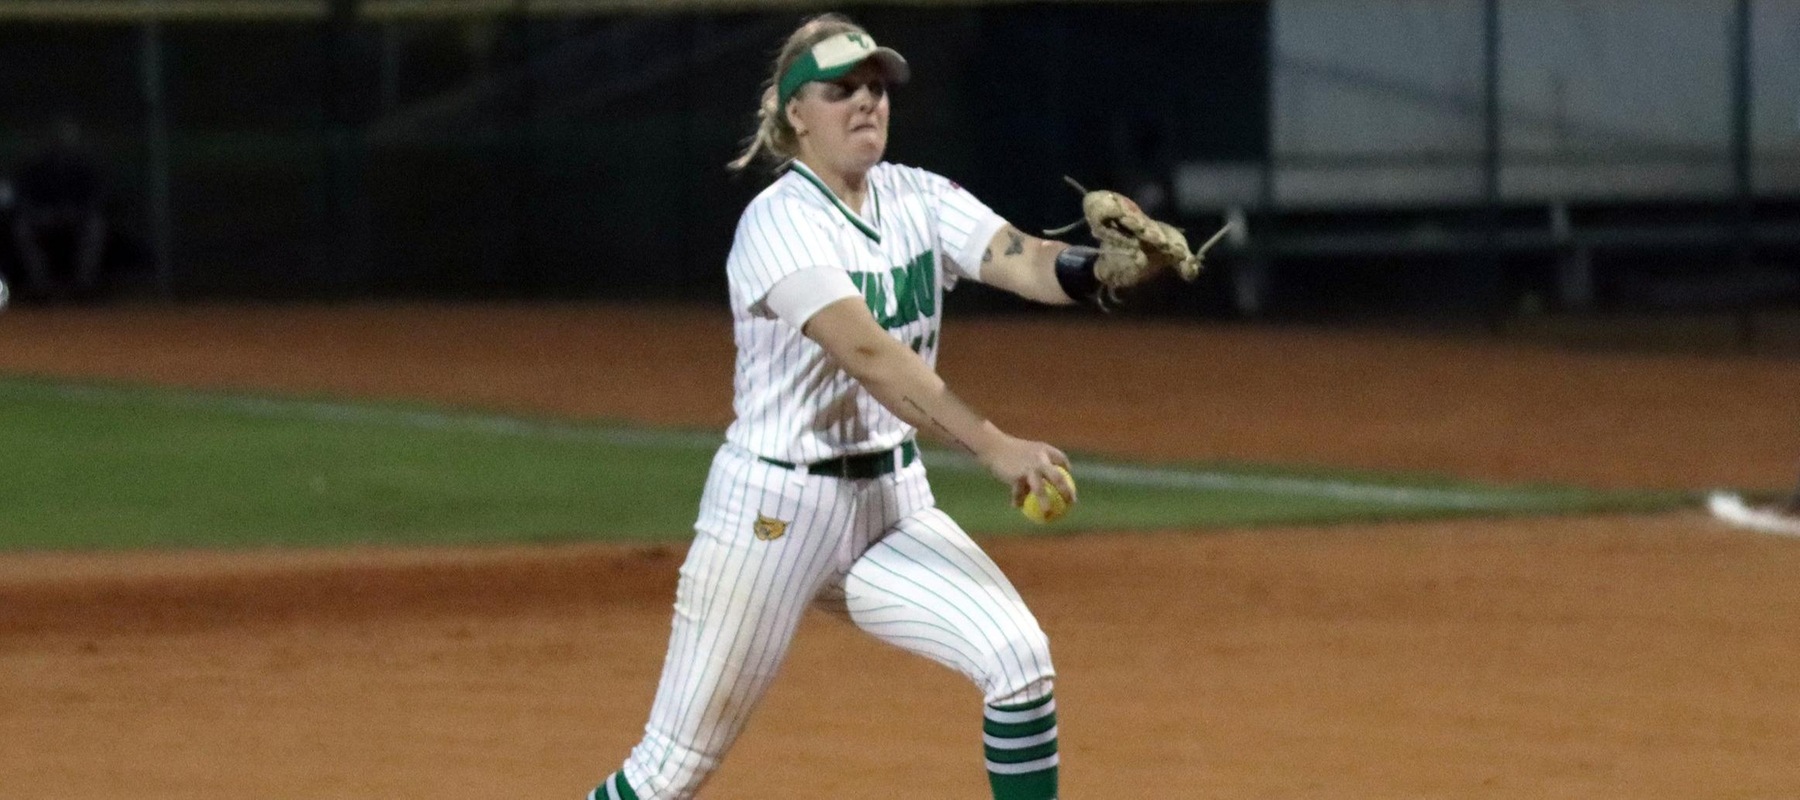 Photo of Kylee Gunkel during her complete game shutout at Saint Leo. Copyright 2023; Wilmington University. All rights reserved. Photo by Erin Harvey. February 27, 2023 at Saint Leo.